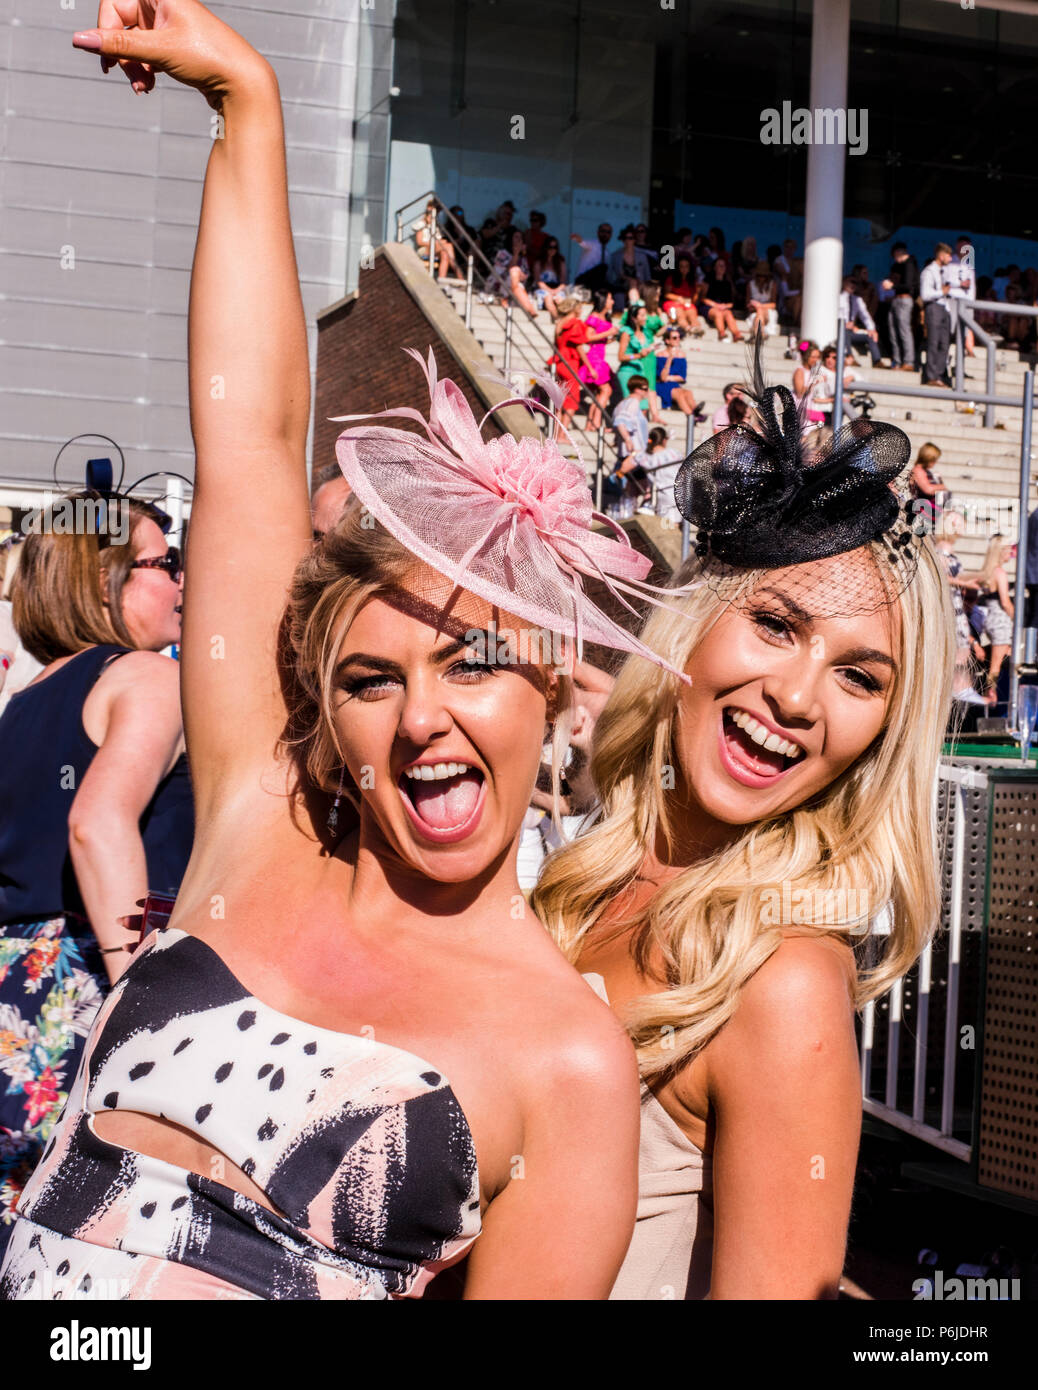 Two young female racegoers, dancing and posing for the camera during Paloma Faith's performance at York Racecourse, York, England, 30th June 2018 Stock Photo